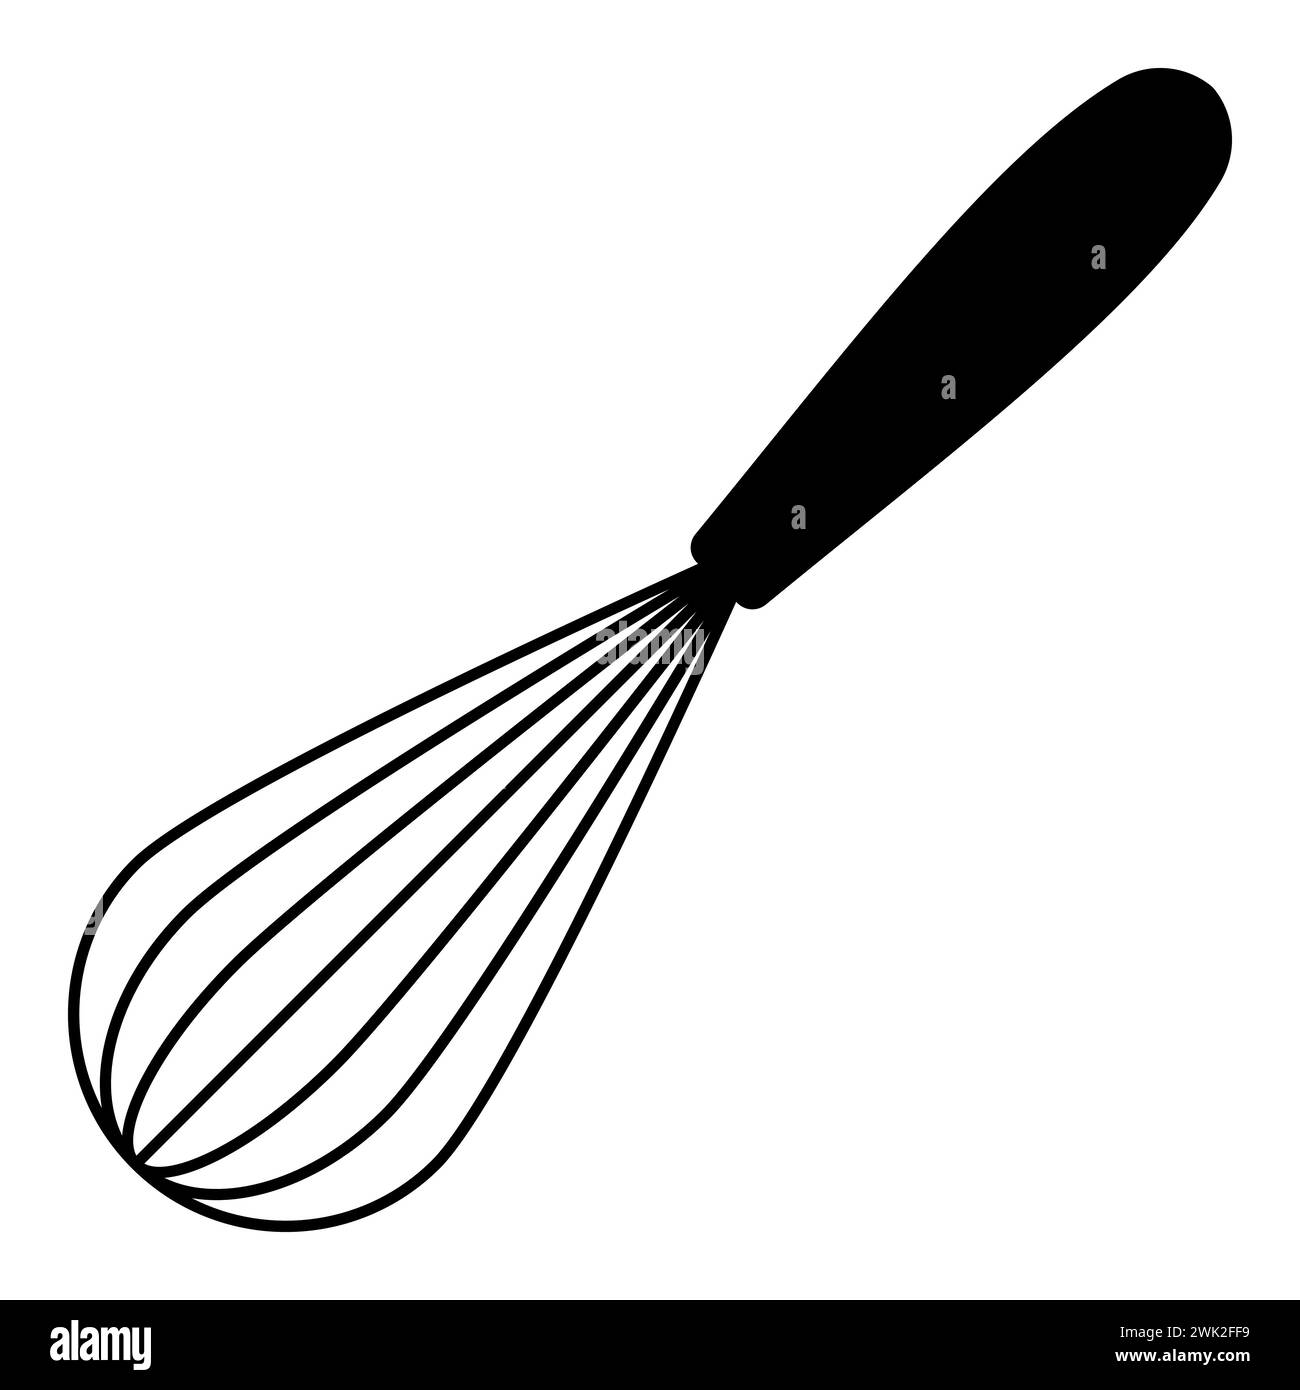 Culinary whisk icon, hand mixer whisk for cooking Stock Vector